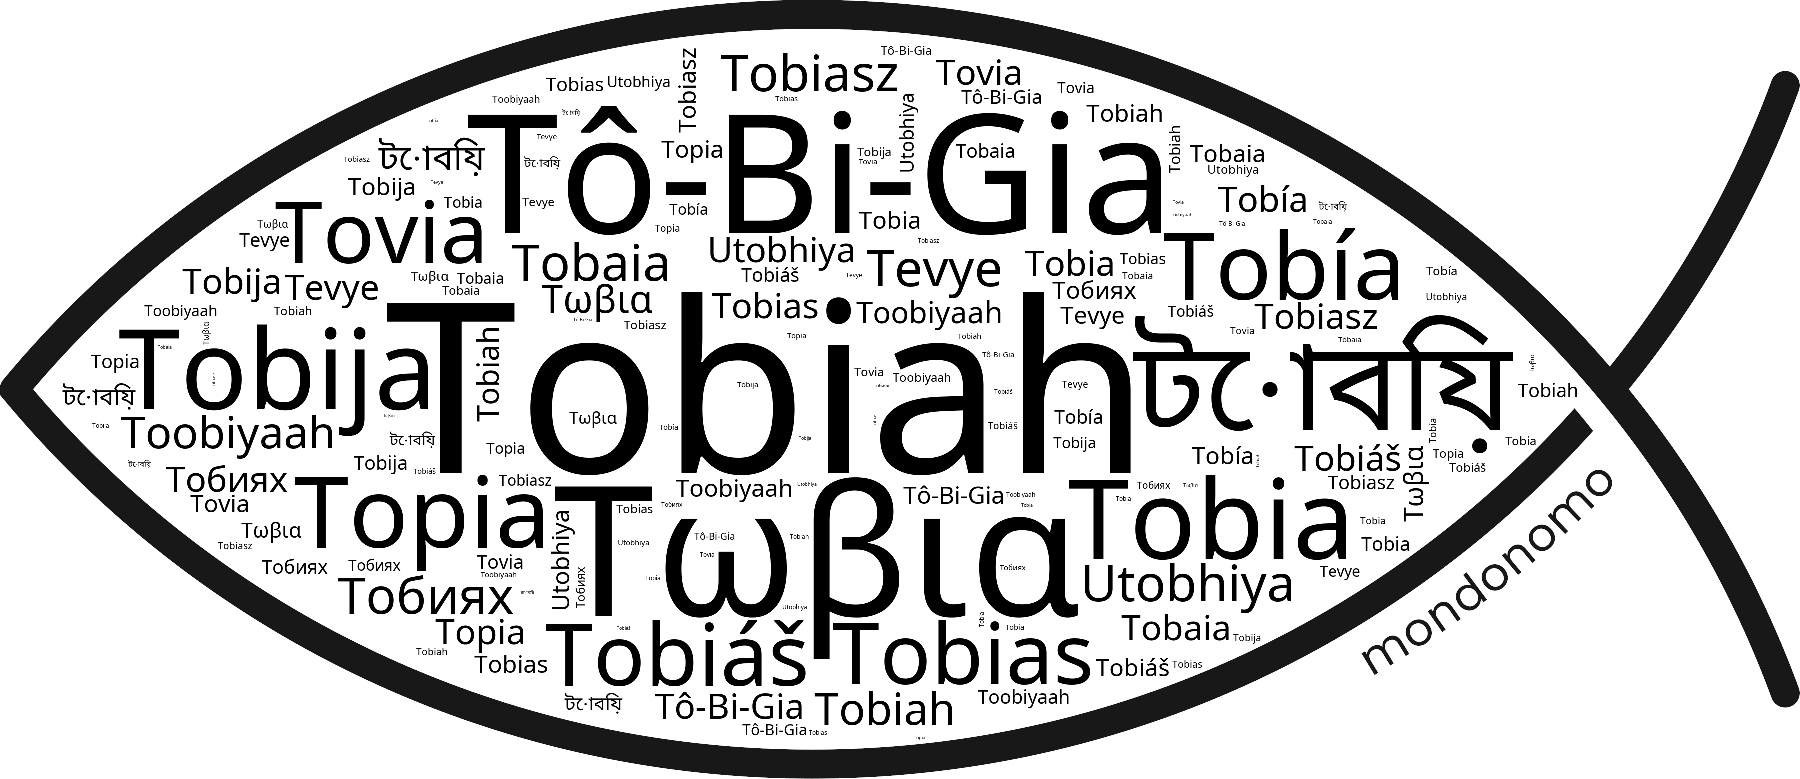 Name Tobiah in the world's Bibles